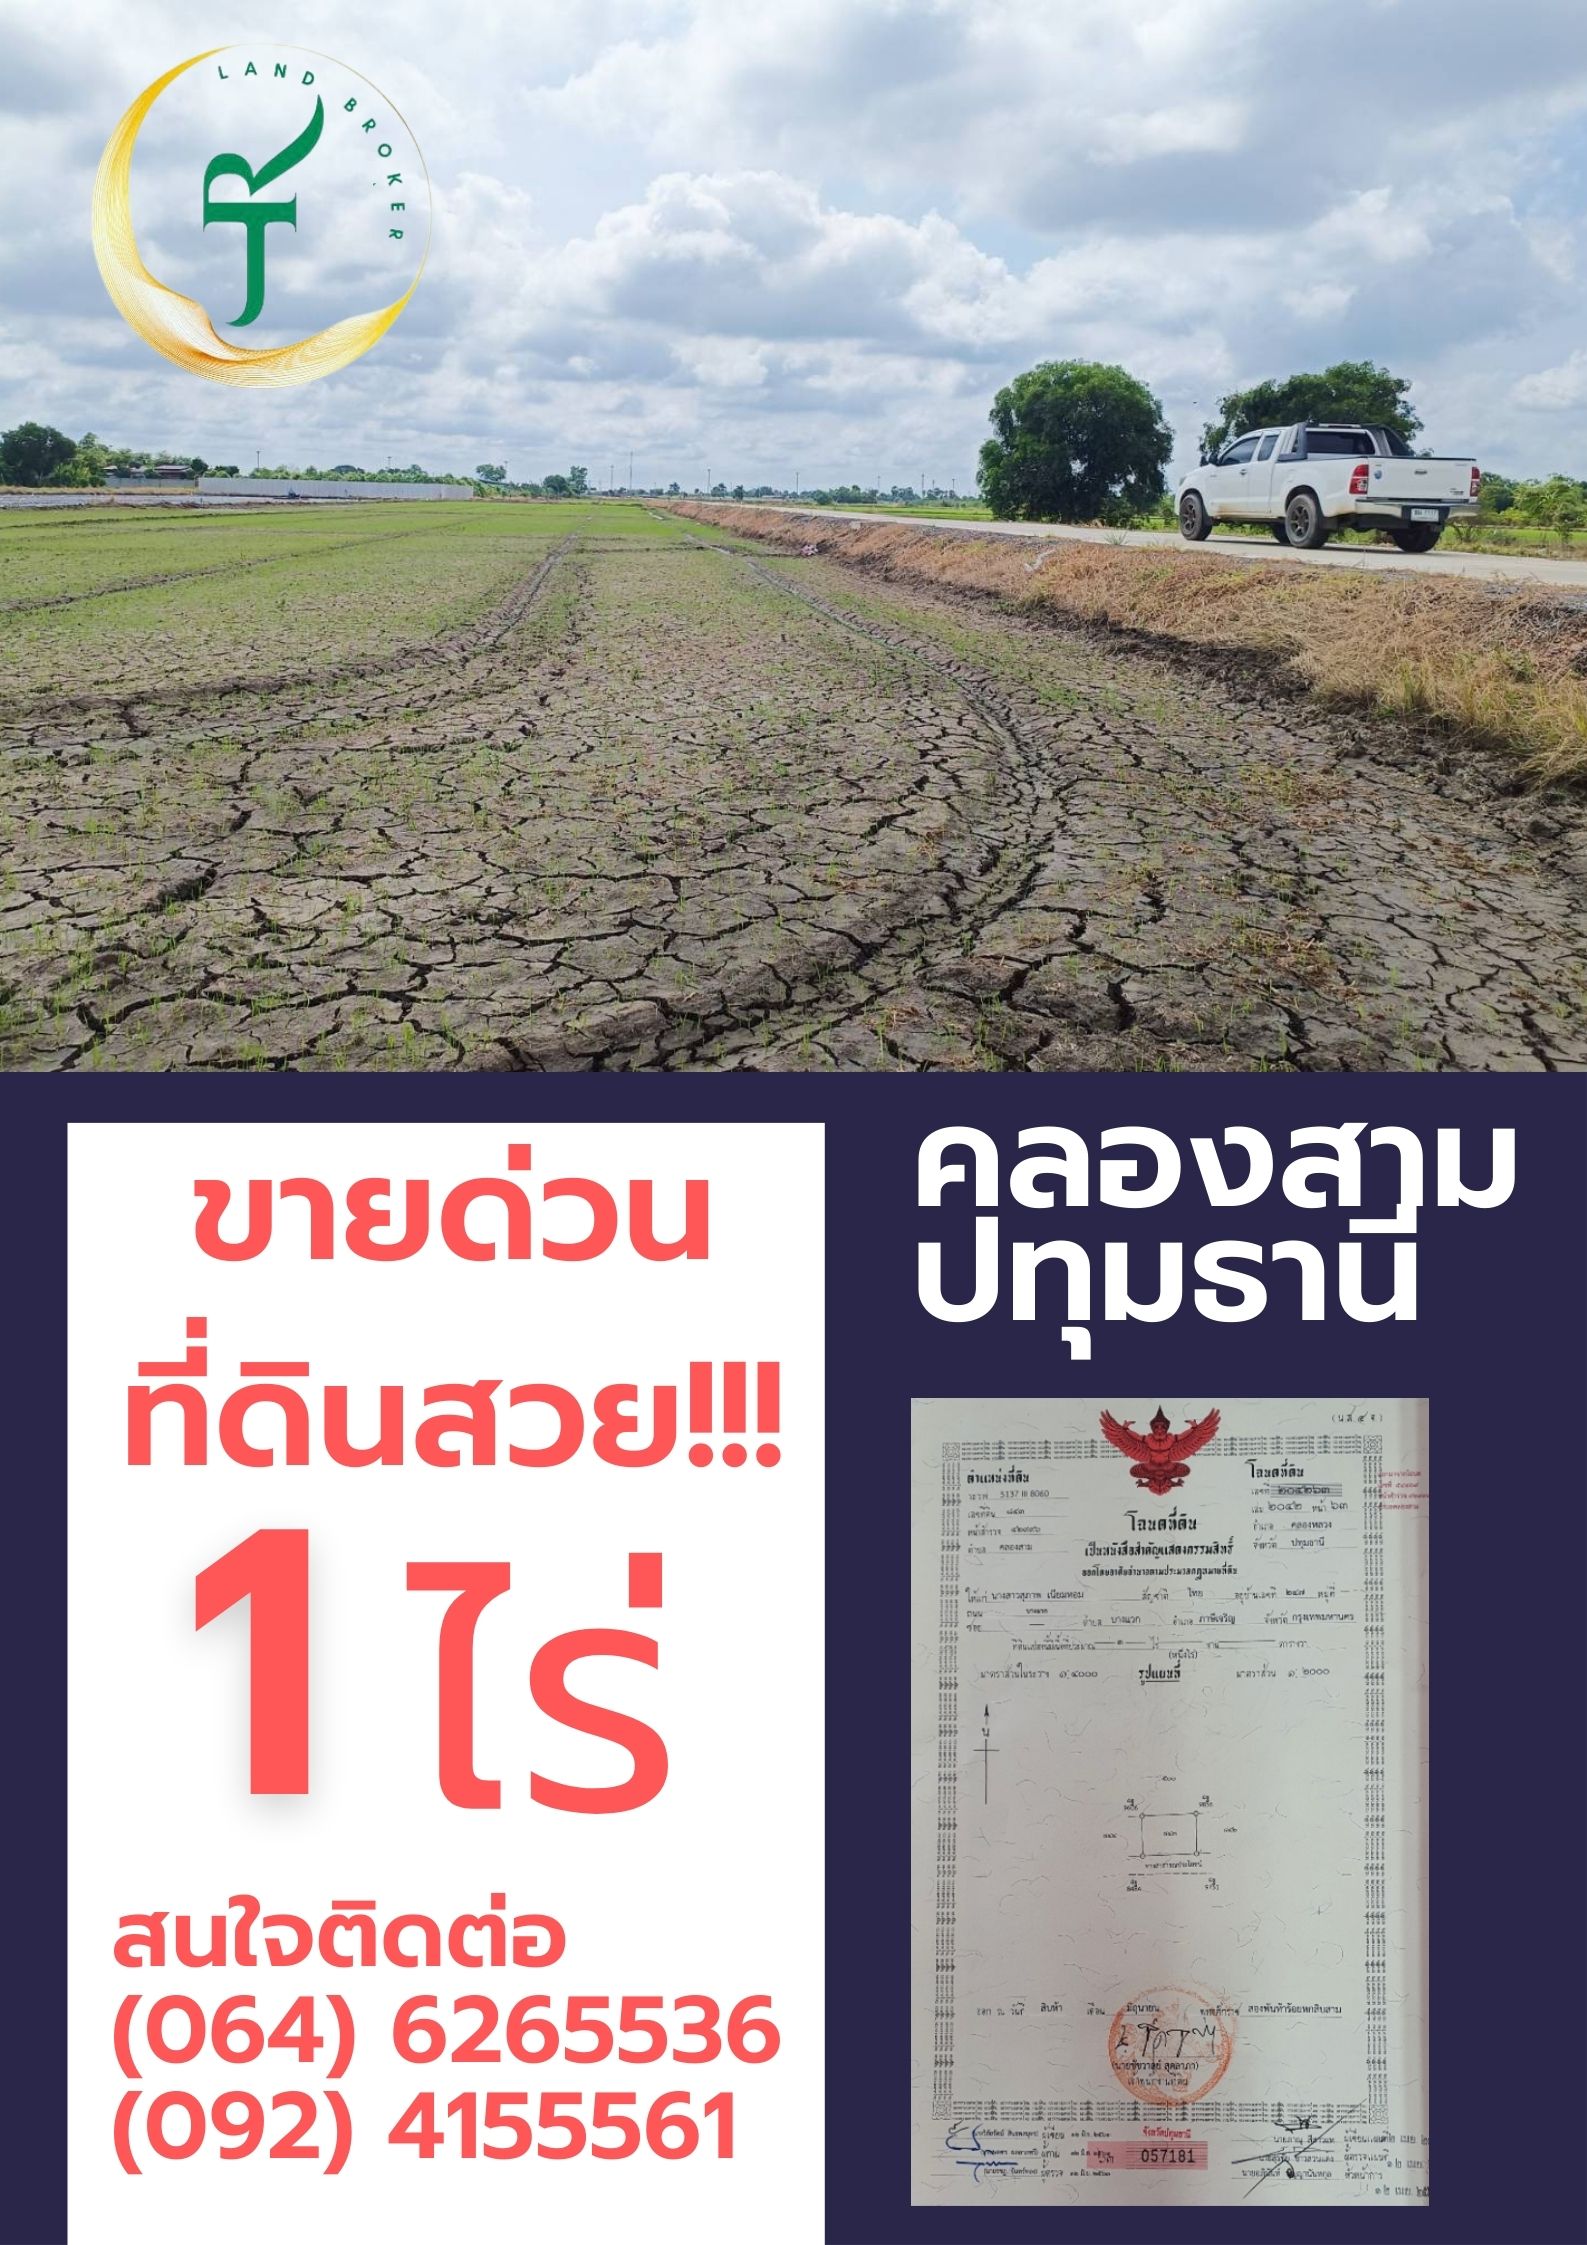 Brown Dry Land World Day to Combat Desertification Poster (1)